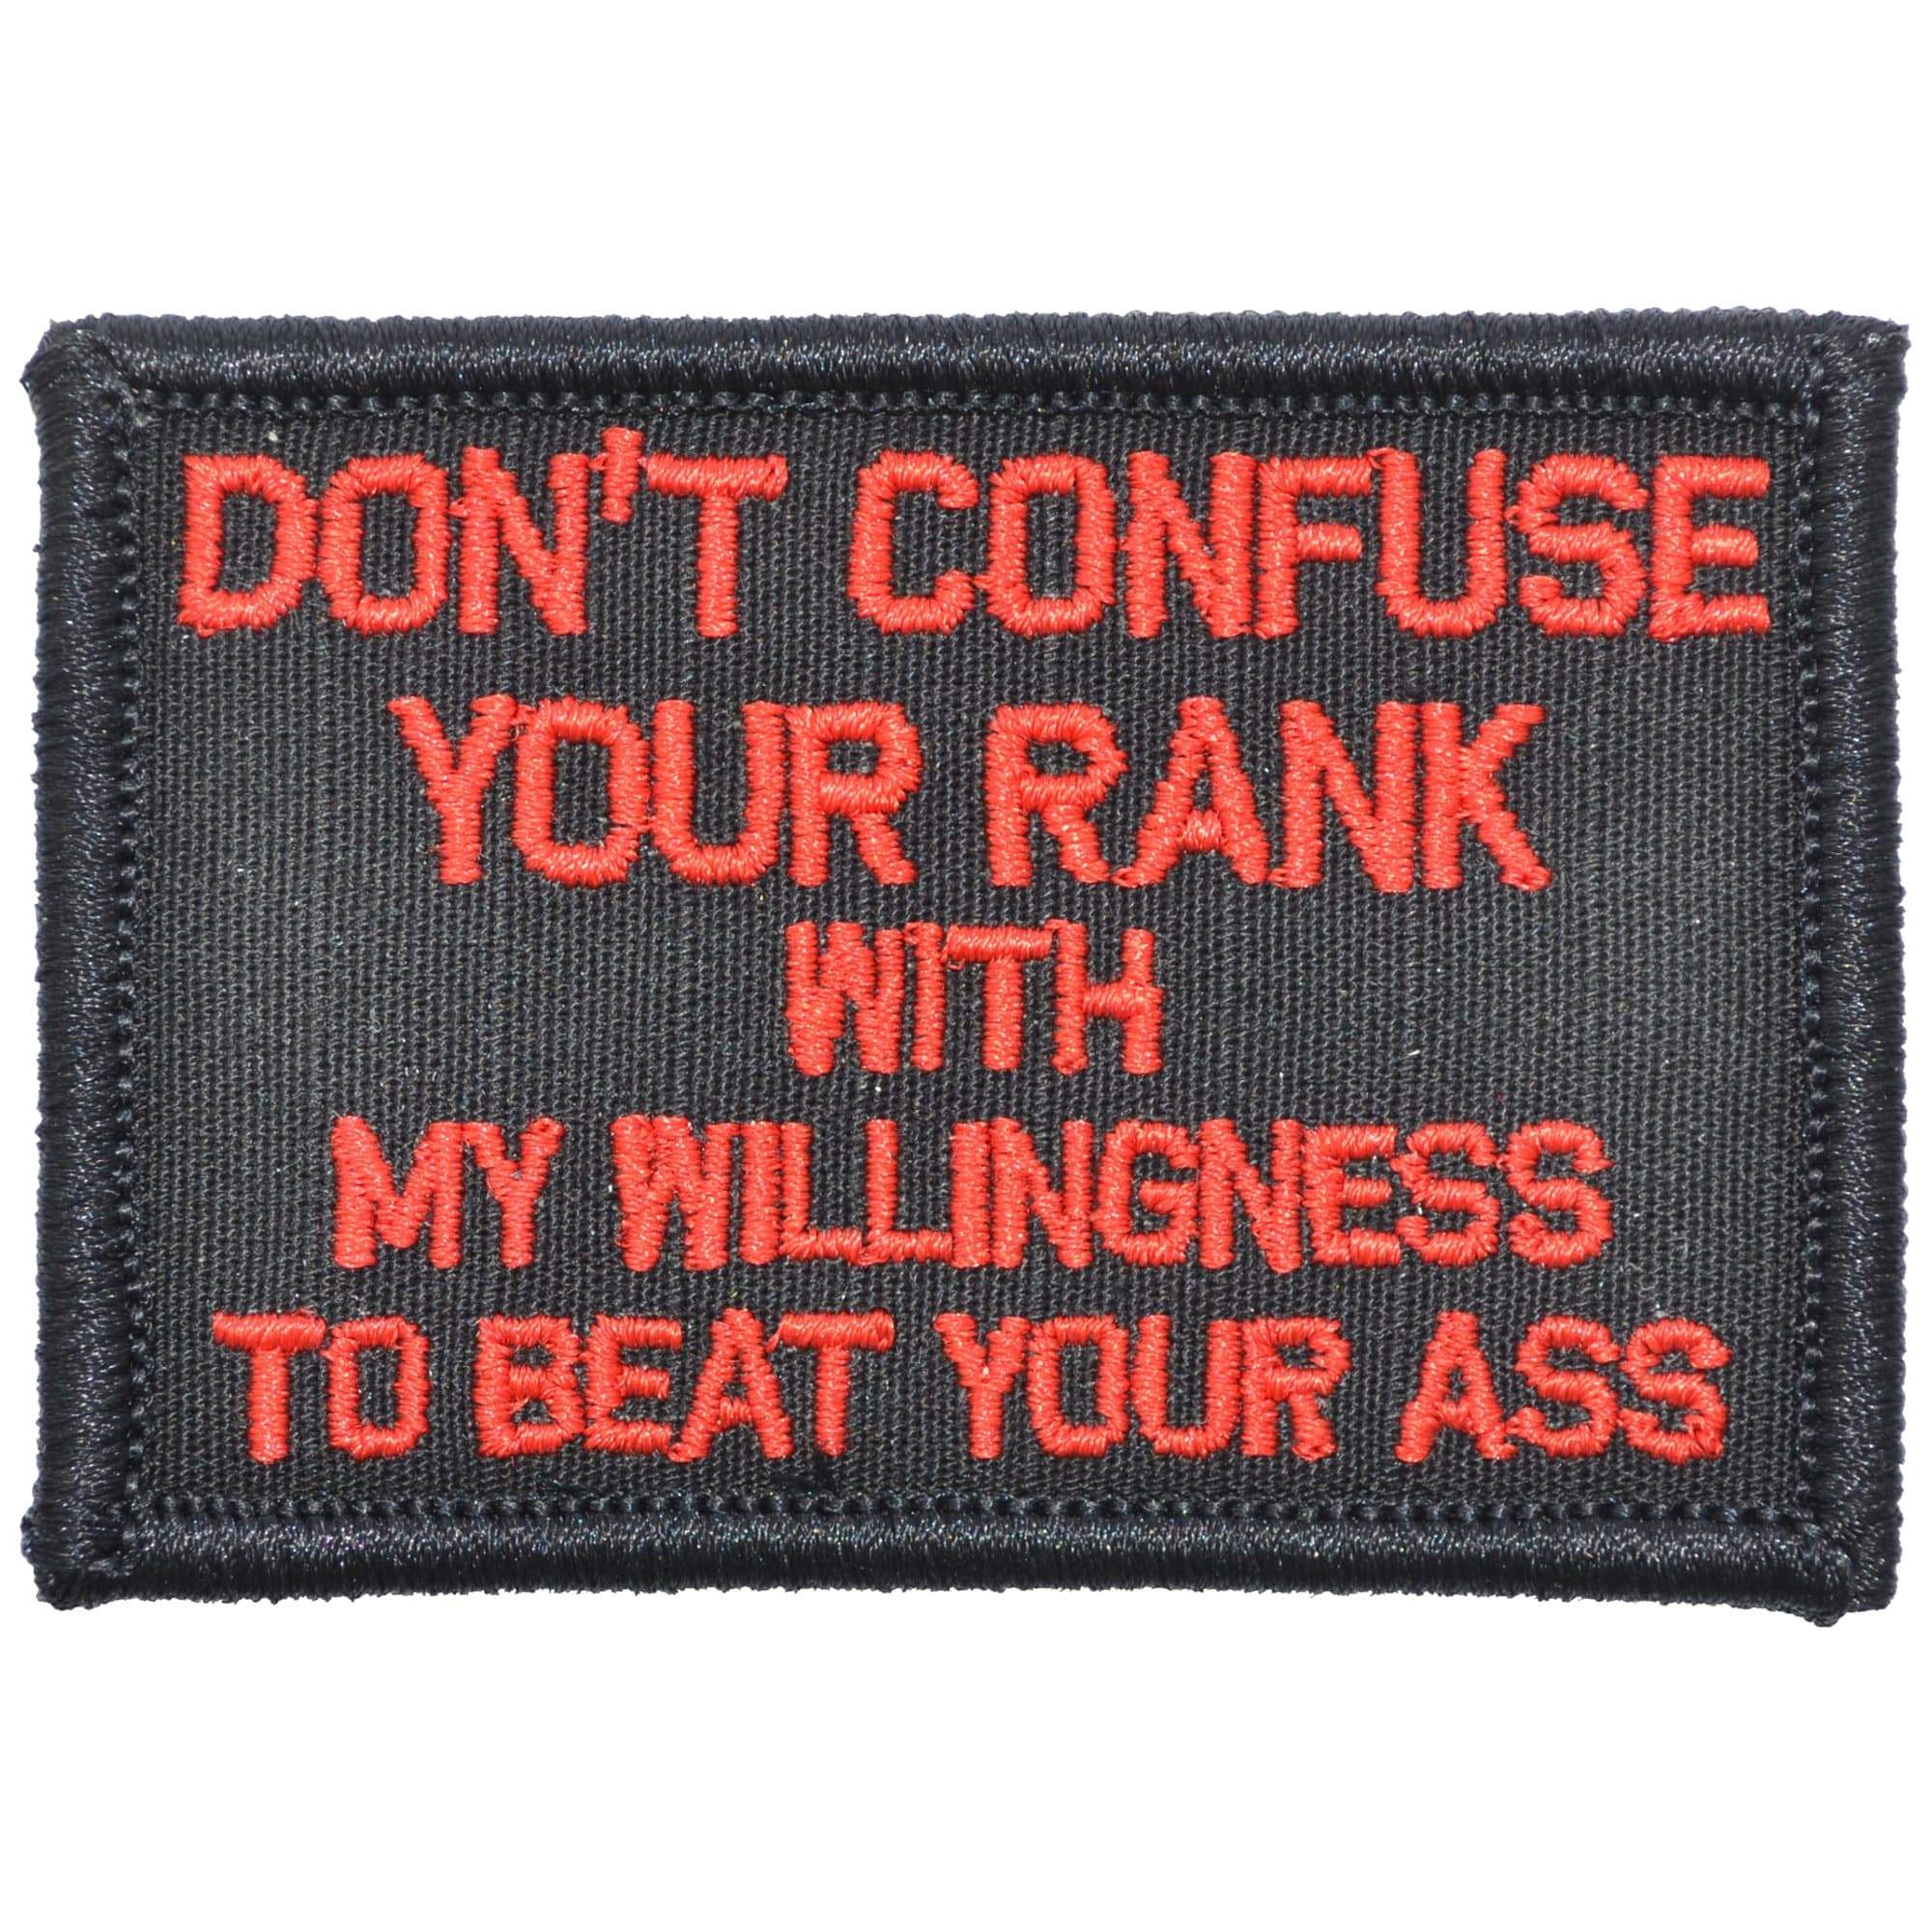 Tactical Gear Junkie Patches Black w/ Red Don't Confuse Your Rank With My Willingness To Beat Your Ass - 2x3 Patch